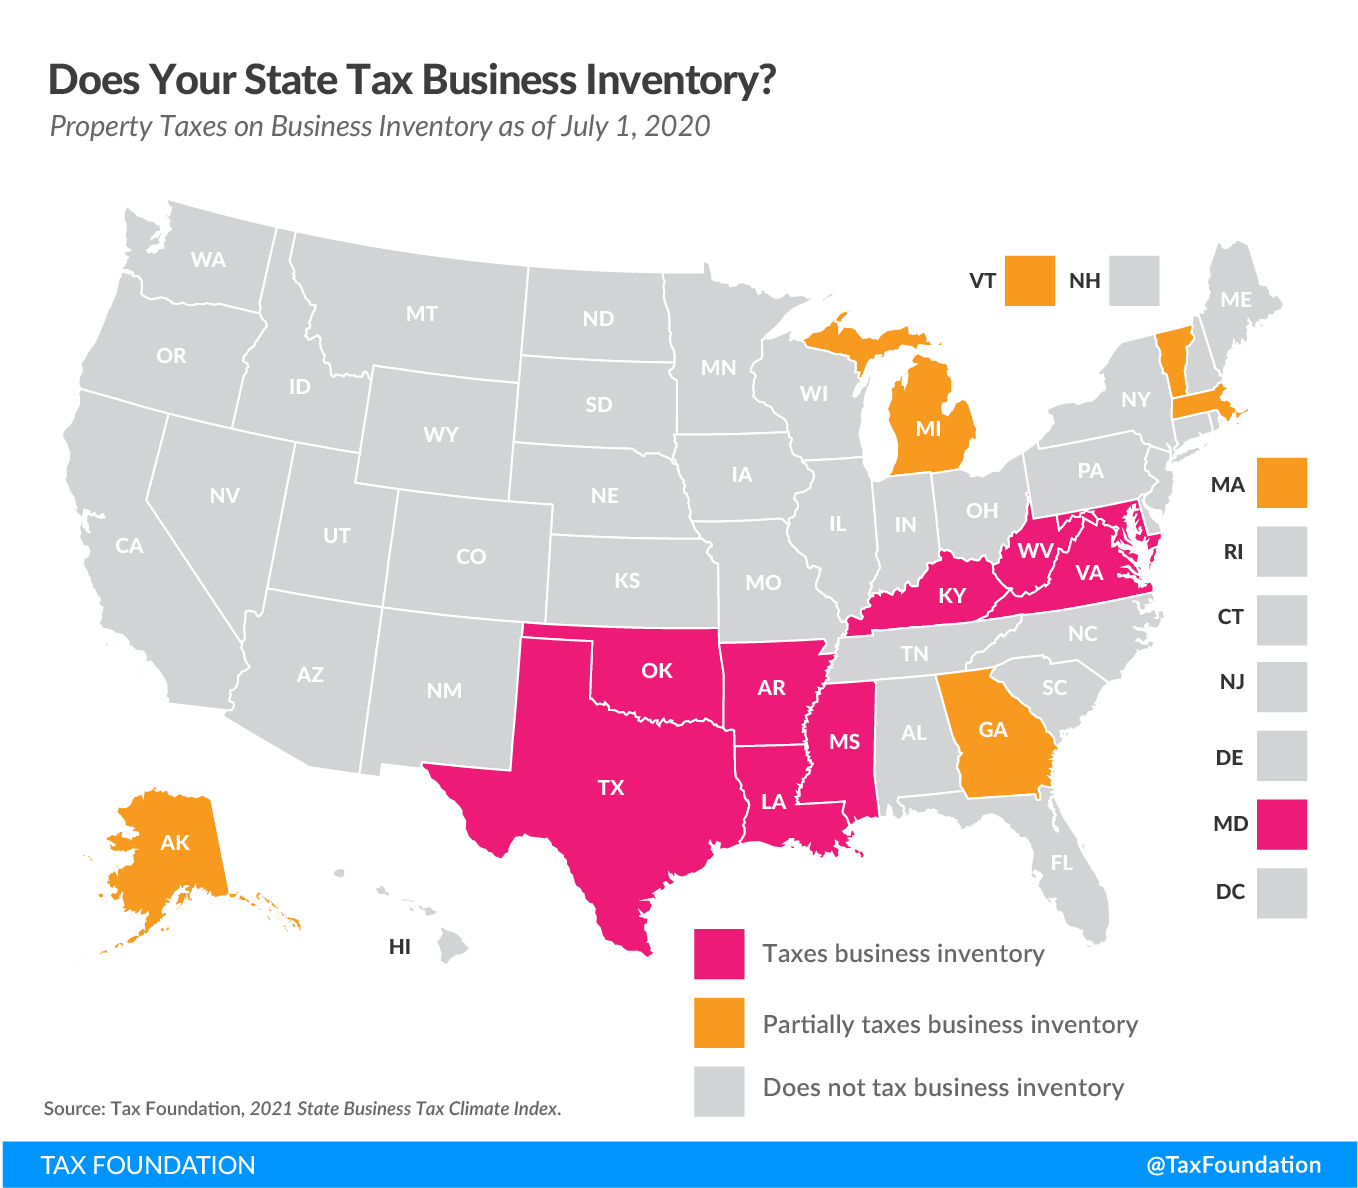 State business inventory tax. Does your state tax business inventory? Are businesses tax on inventory? Explore state business tangible personal property tax as of July 1, 2020, taxes on business inventory, inventory taxes